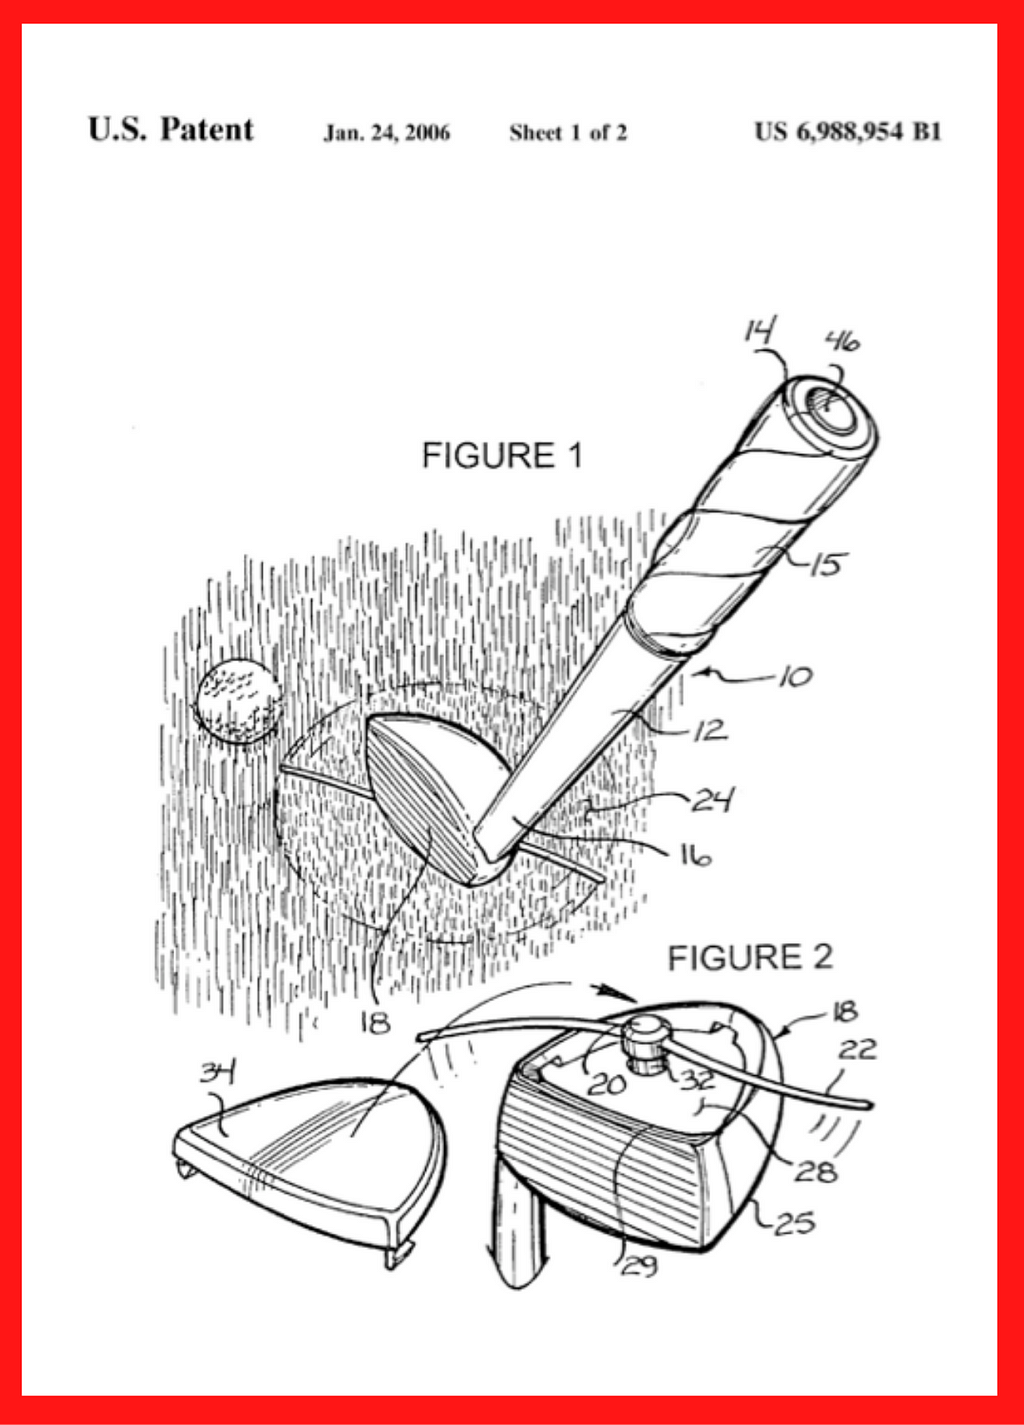 Patent for a weed-cutting golf club